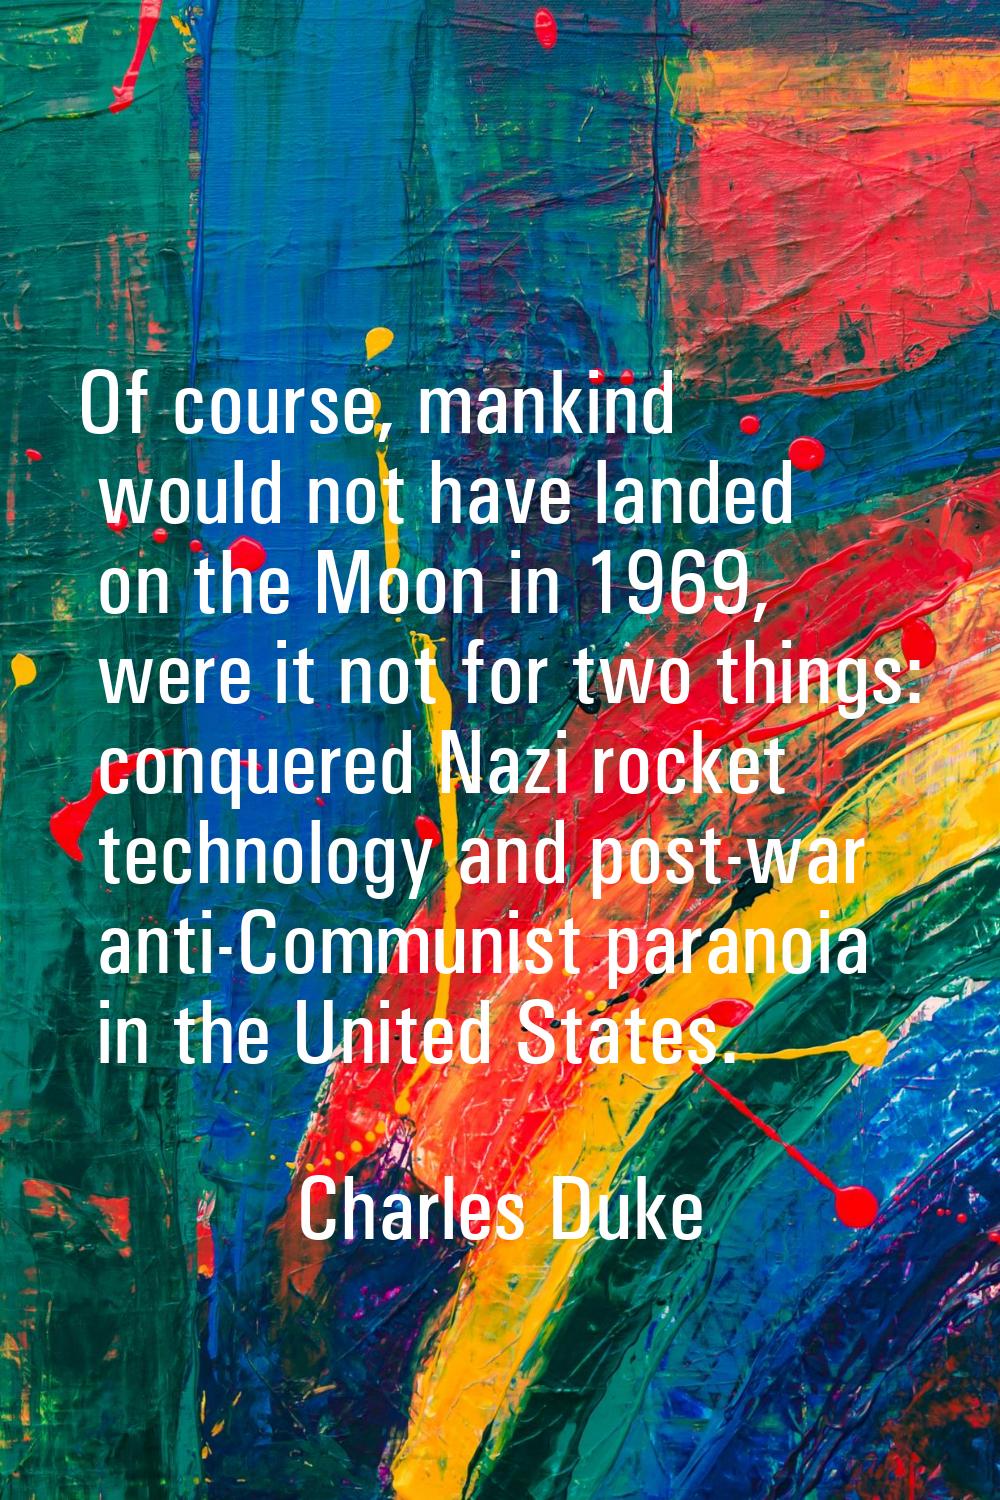 Of course, mankind would not have landed on the Moon in 1969, were it not for two things: conquered